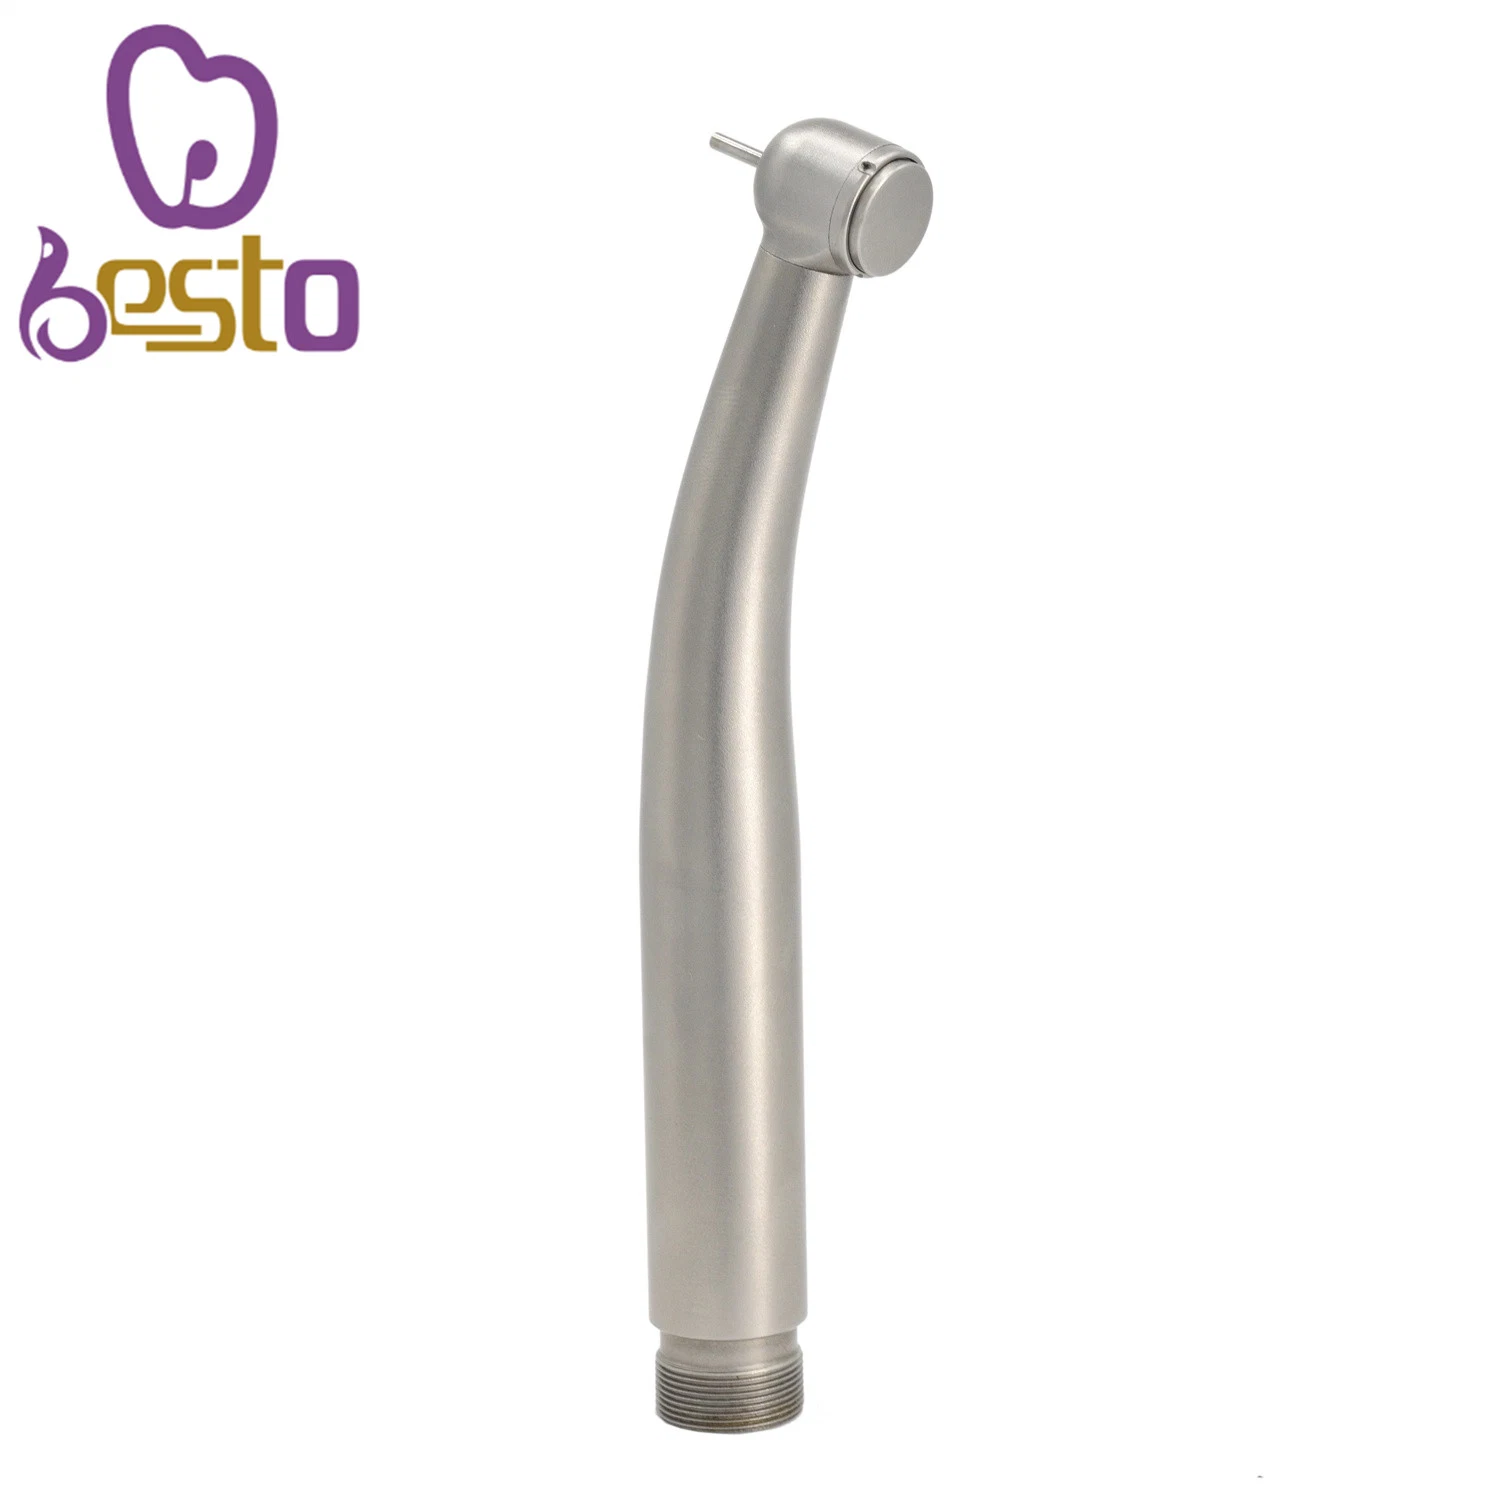 Dental High Speed Handpiece Sirona T3 Racer Boost Push Button 2 Holes Air Rotor Turbine Made of Stainless Steel